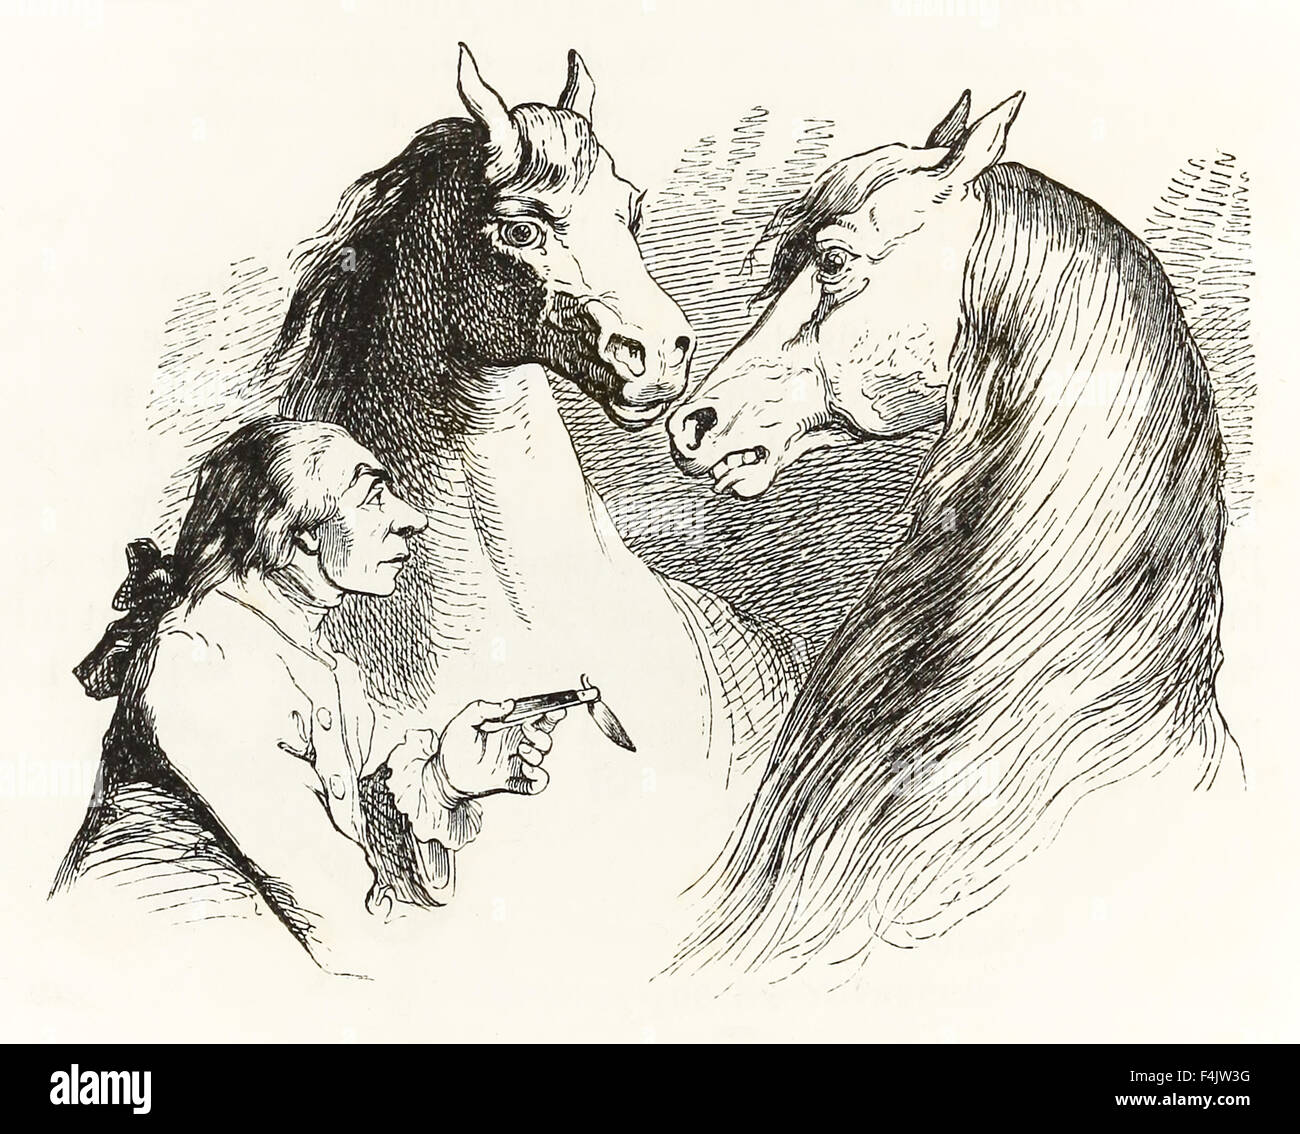 Gulliver converses with talking horses in Houyhnhnms Land from 'Gulliver's  Travels' by Jonathan Swift (1667-1745), illustration by J.J. Grandville  (1803-1847). See description for more information Stock Photo - Alamy